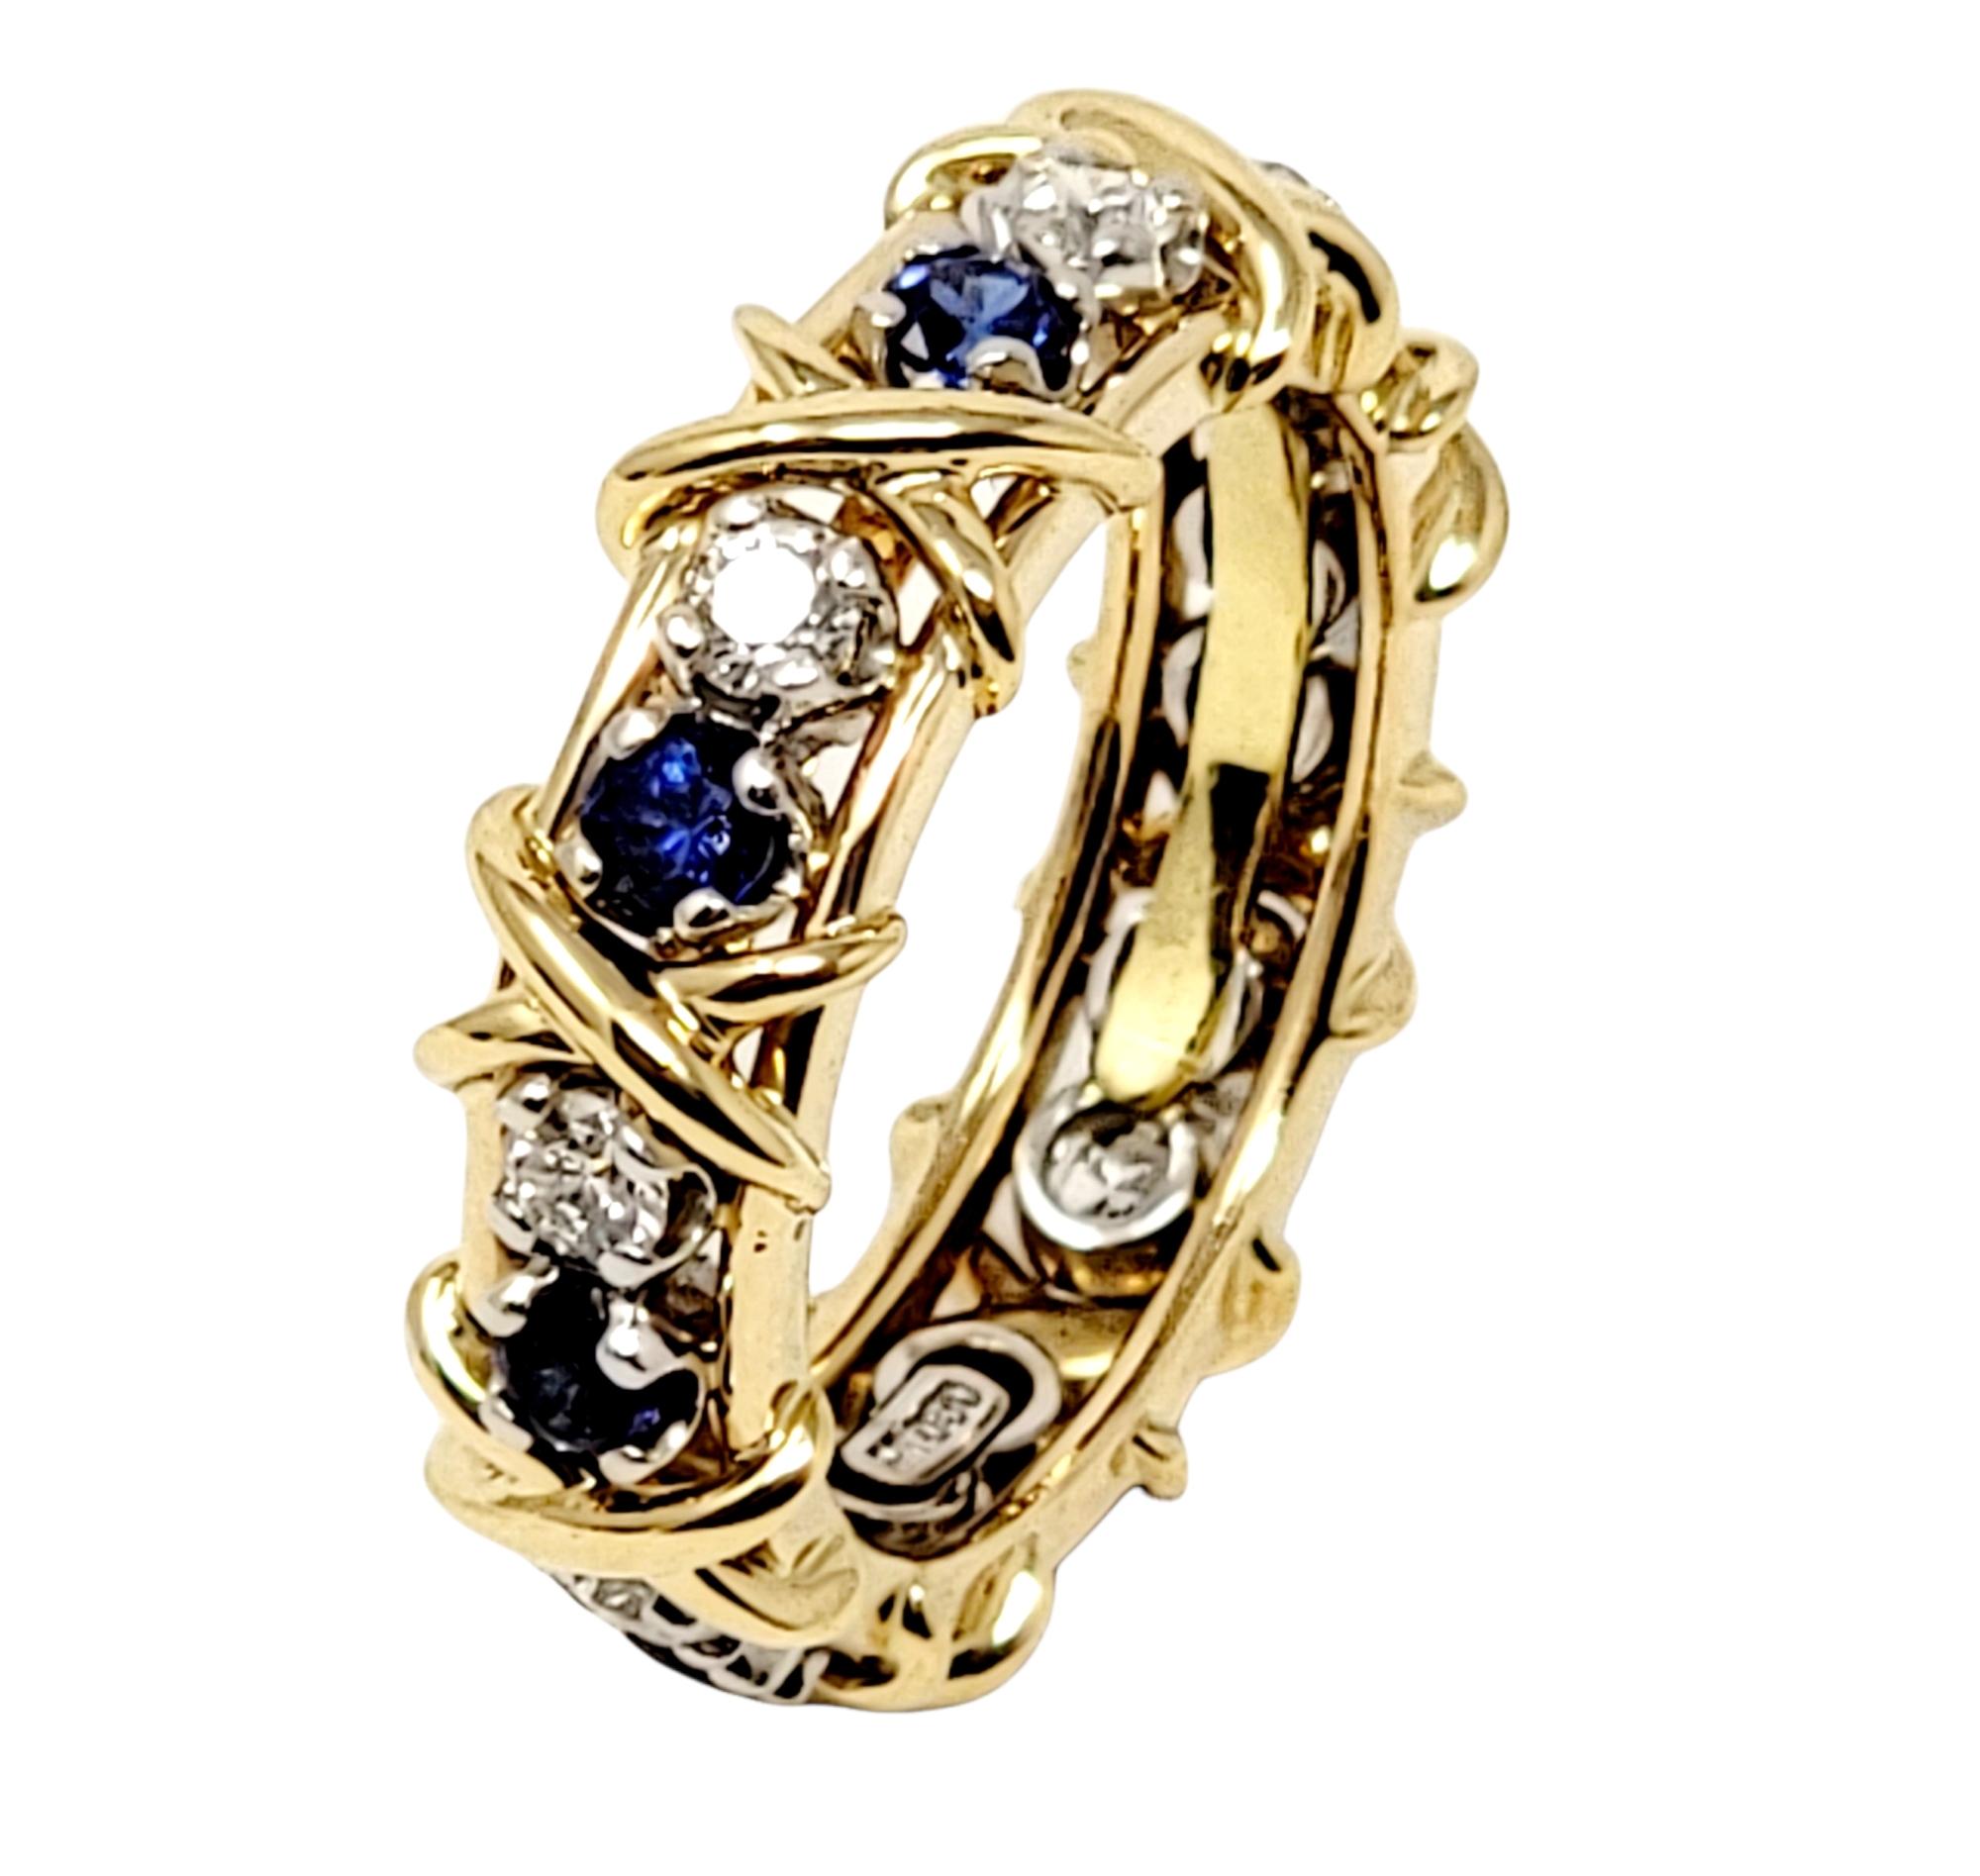 Ring size: 7.5

Absolutely exquisite Sixteen Stone diamond and sapphire eternity band ring by Jean Schlumberger for Tiffany & Co. This gorgeous piece boasts a sophisticated elegance with a contemporary yet classic design. The dazzling Tiffany & Co.